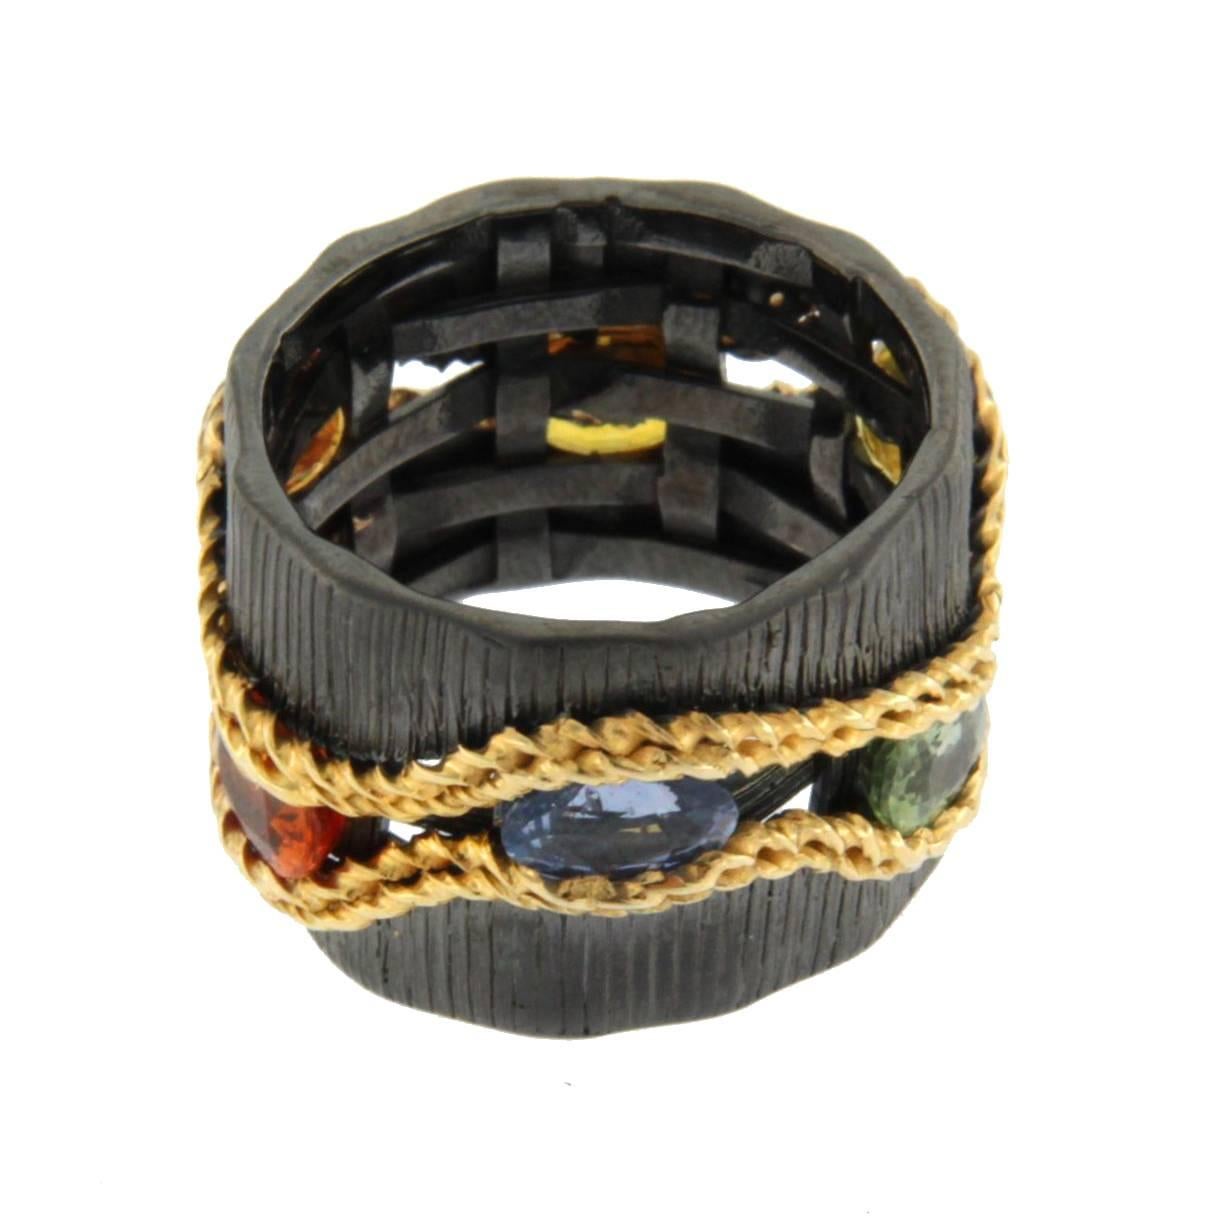 Jona design collection, hand crafted in Italy, sterling silver black rhodium plated ring band, set with multicolor sapphires. 
US size 5.5. Can be sized to any specification.  

All Jona jewelry is new and has never been previously owned or worn.